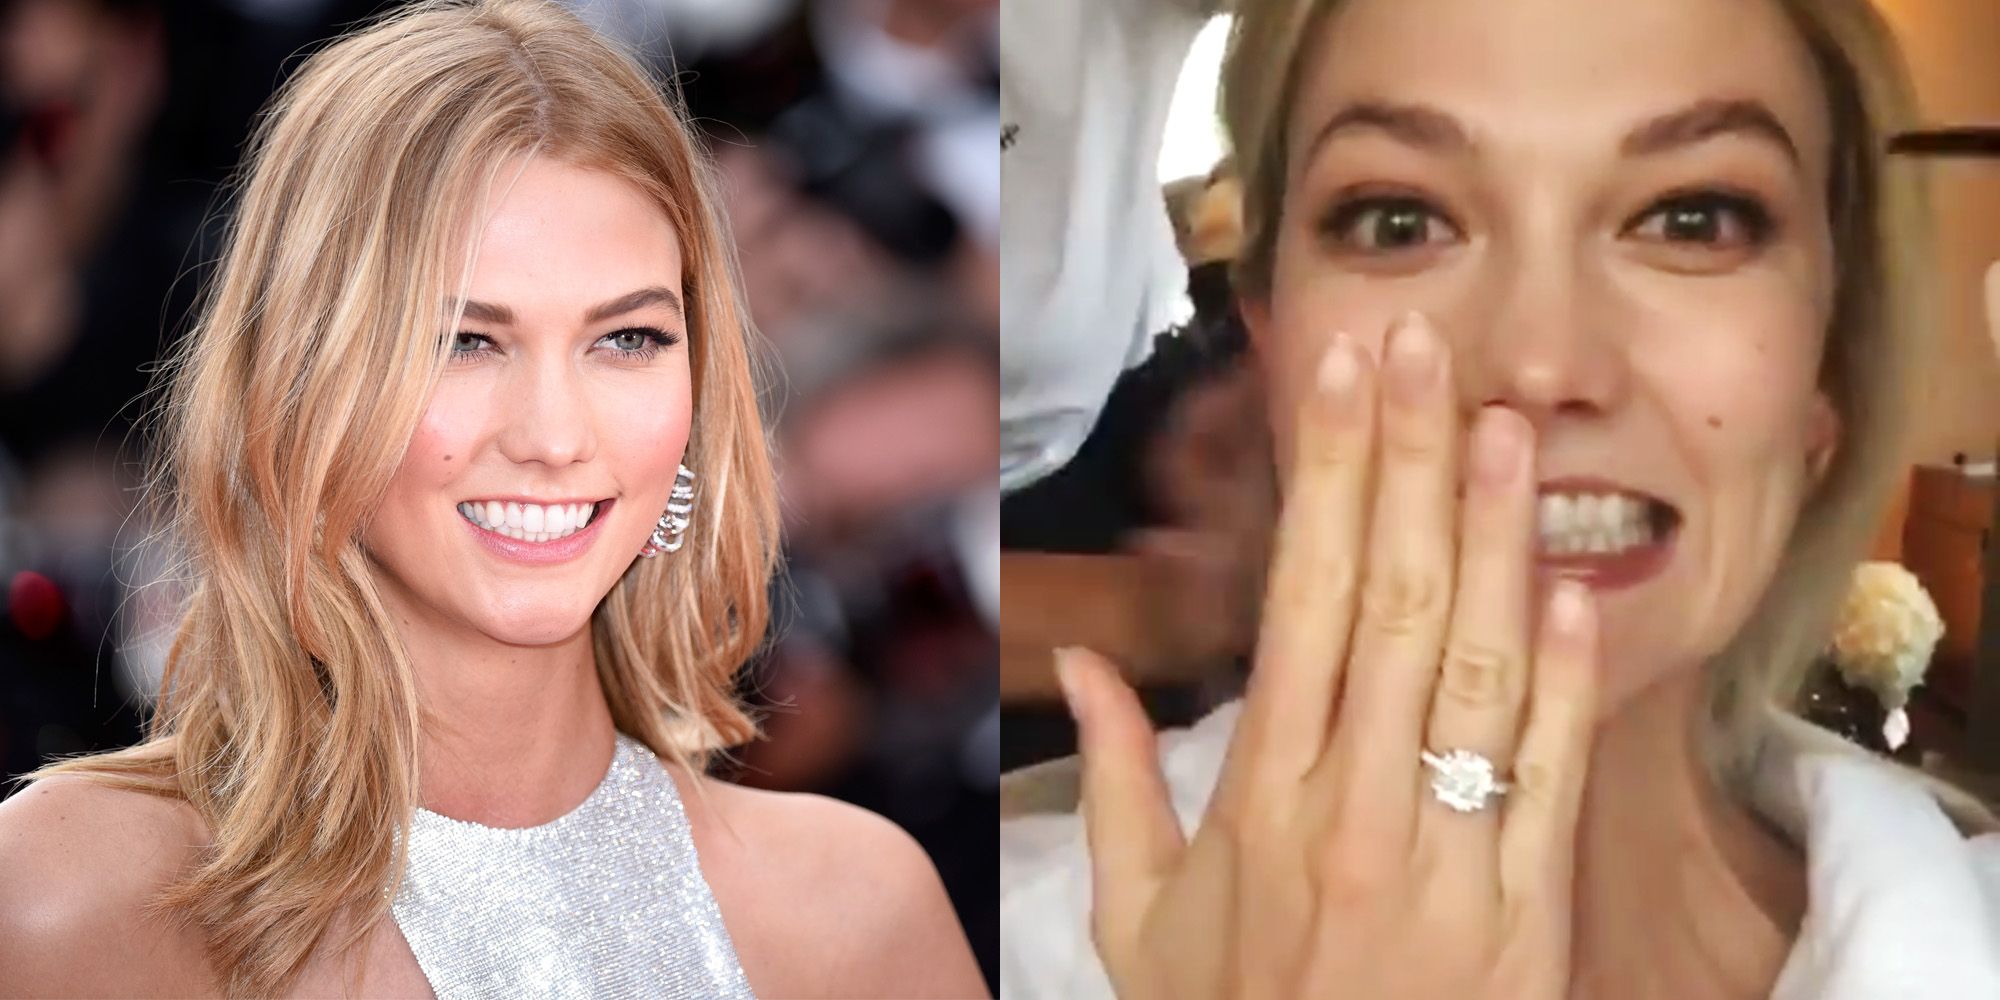 cartier celebrity engagement rings